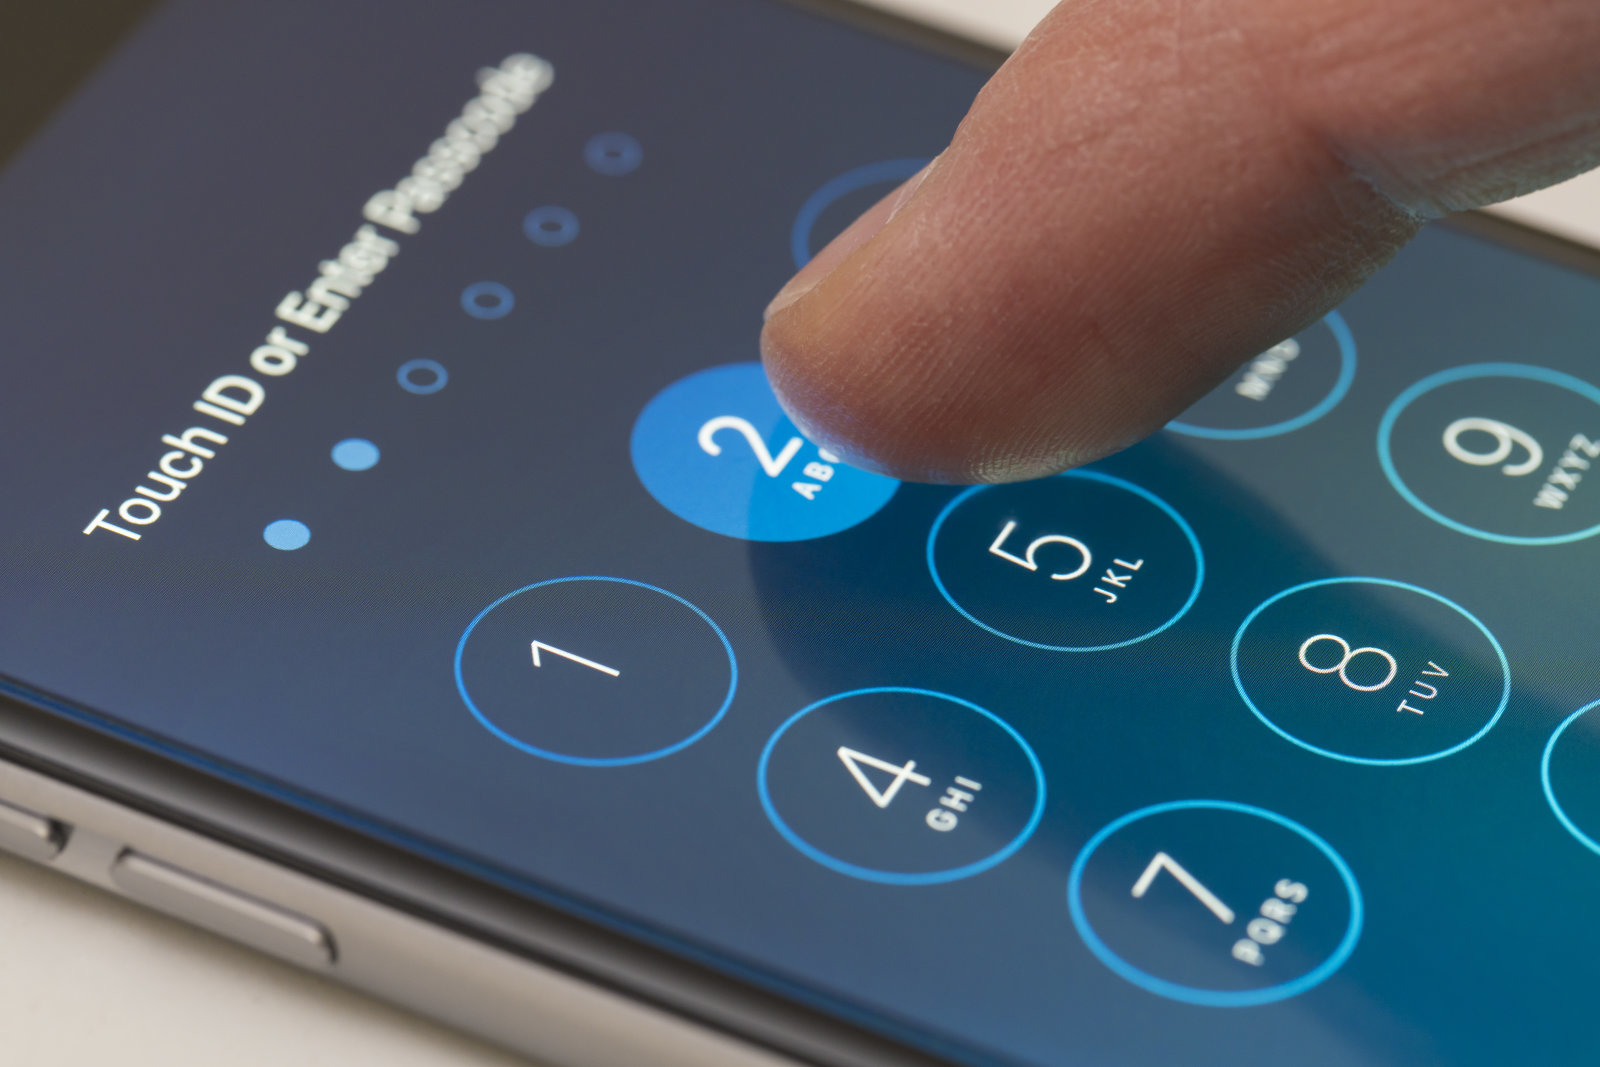 Melbourne, Australia - Sep 24, 2015: Entering passcode on an iPhone running iOS 9.  This new iOS release has six digits passcodes instead of four.